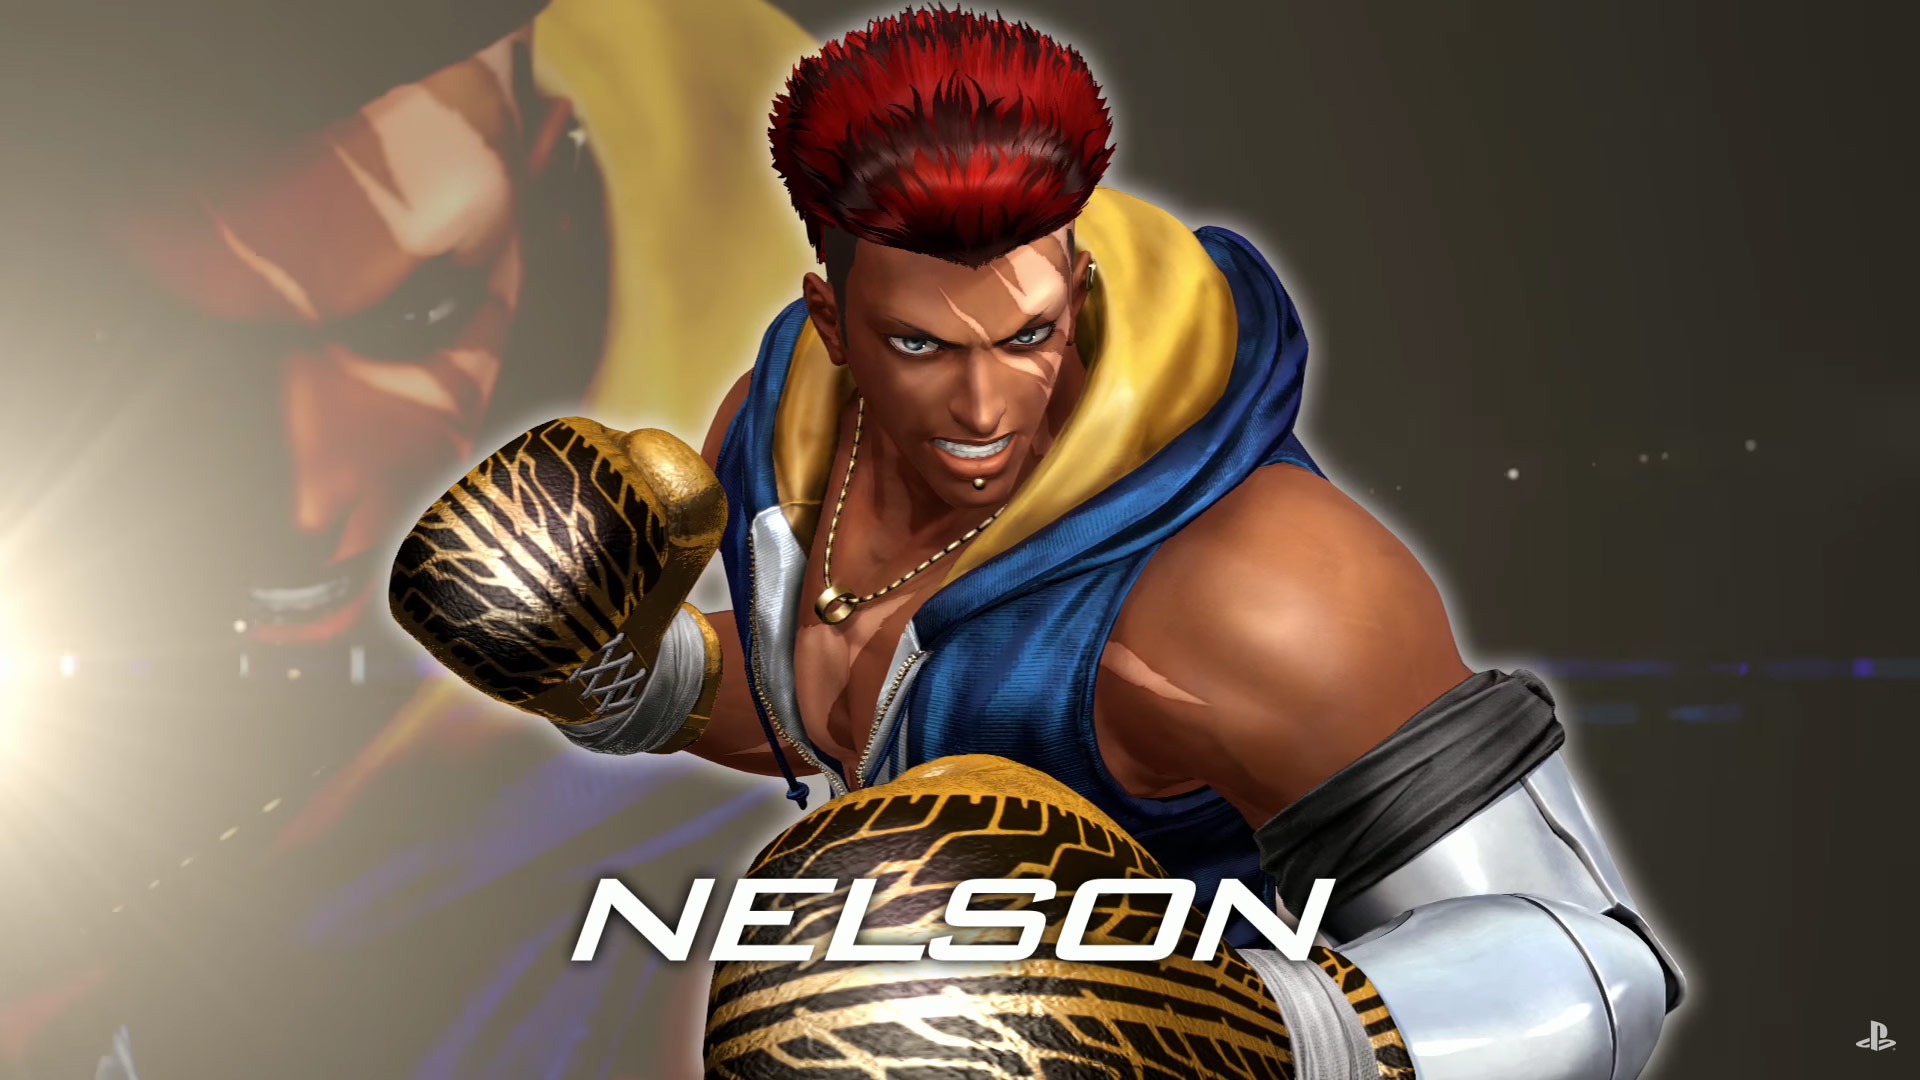 Nelson_The King of Fighters